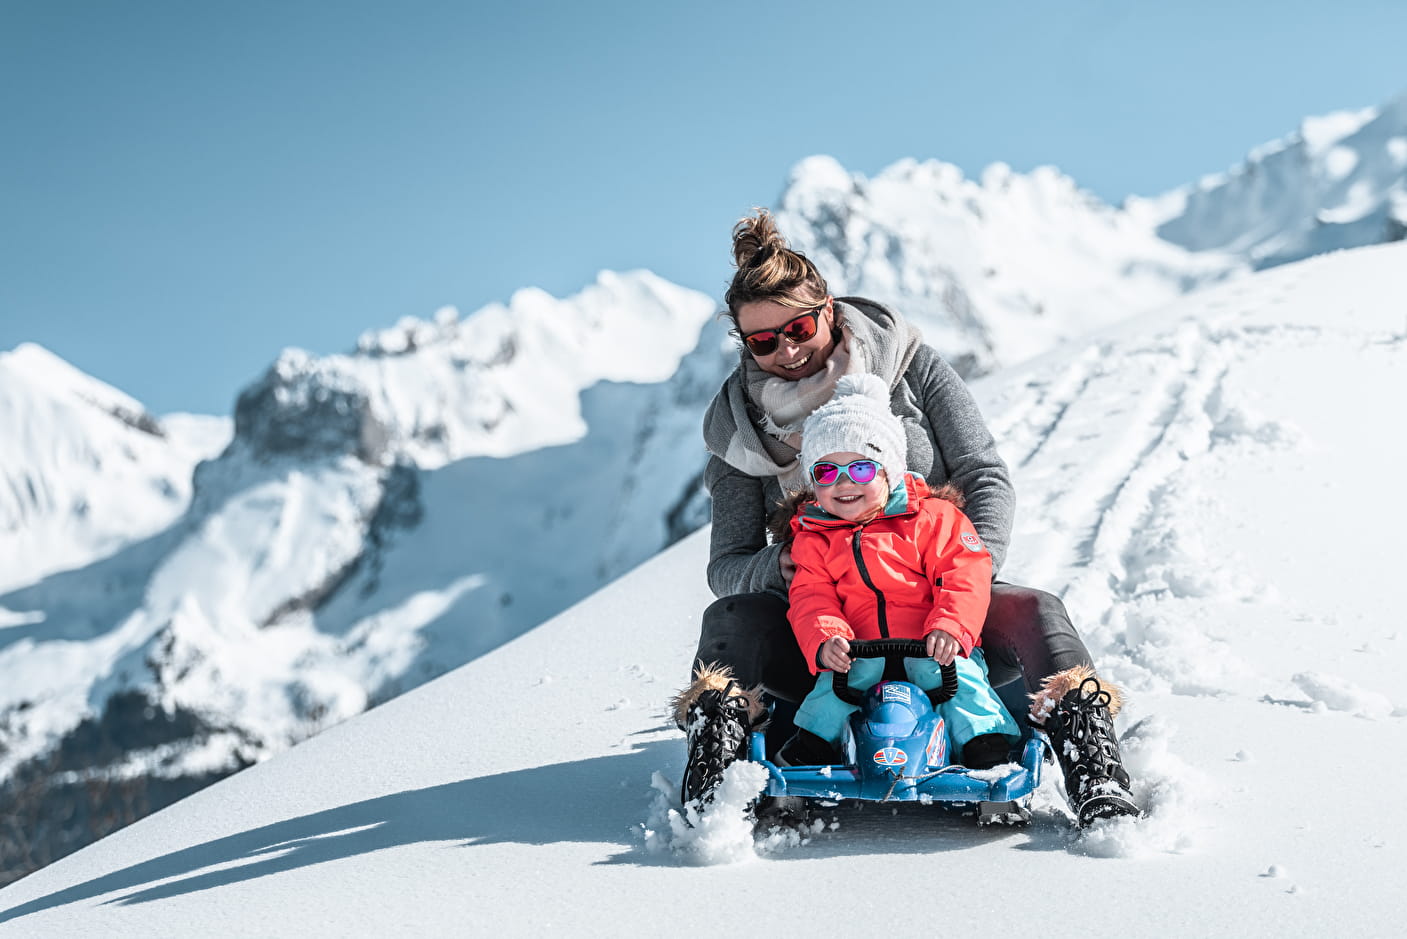  La Clusaz: Traditional Sledding Charm is one of the most exciting sledging winter spots in France